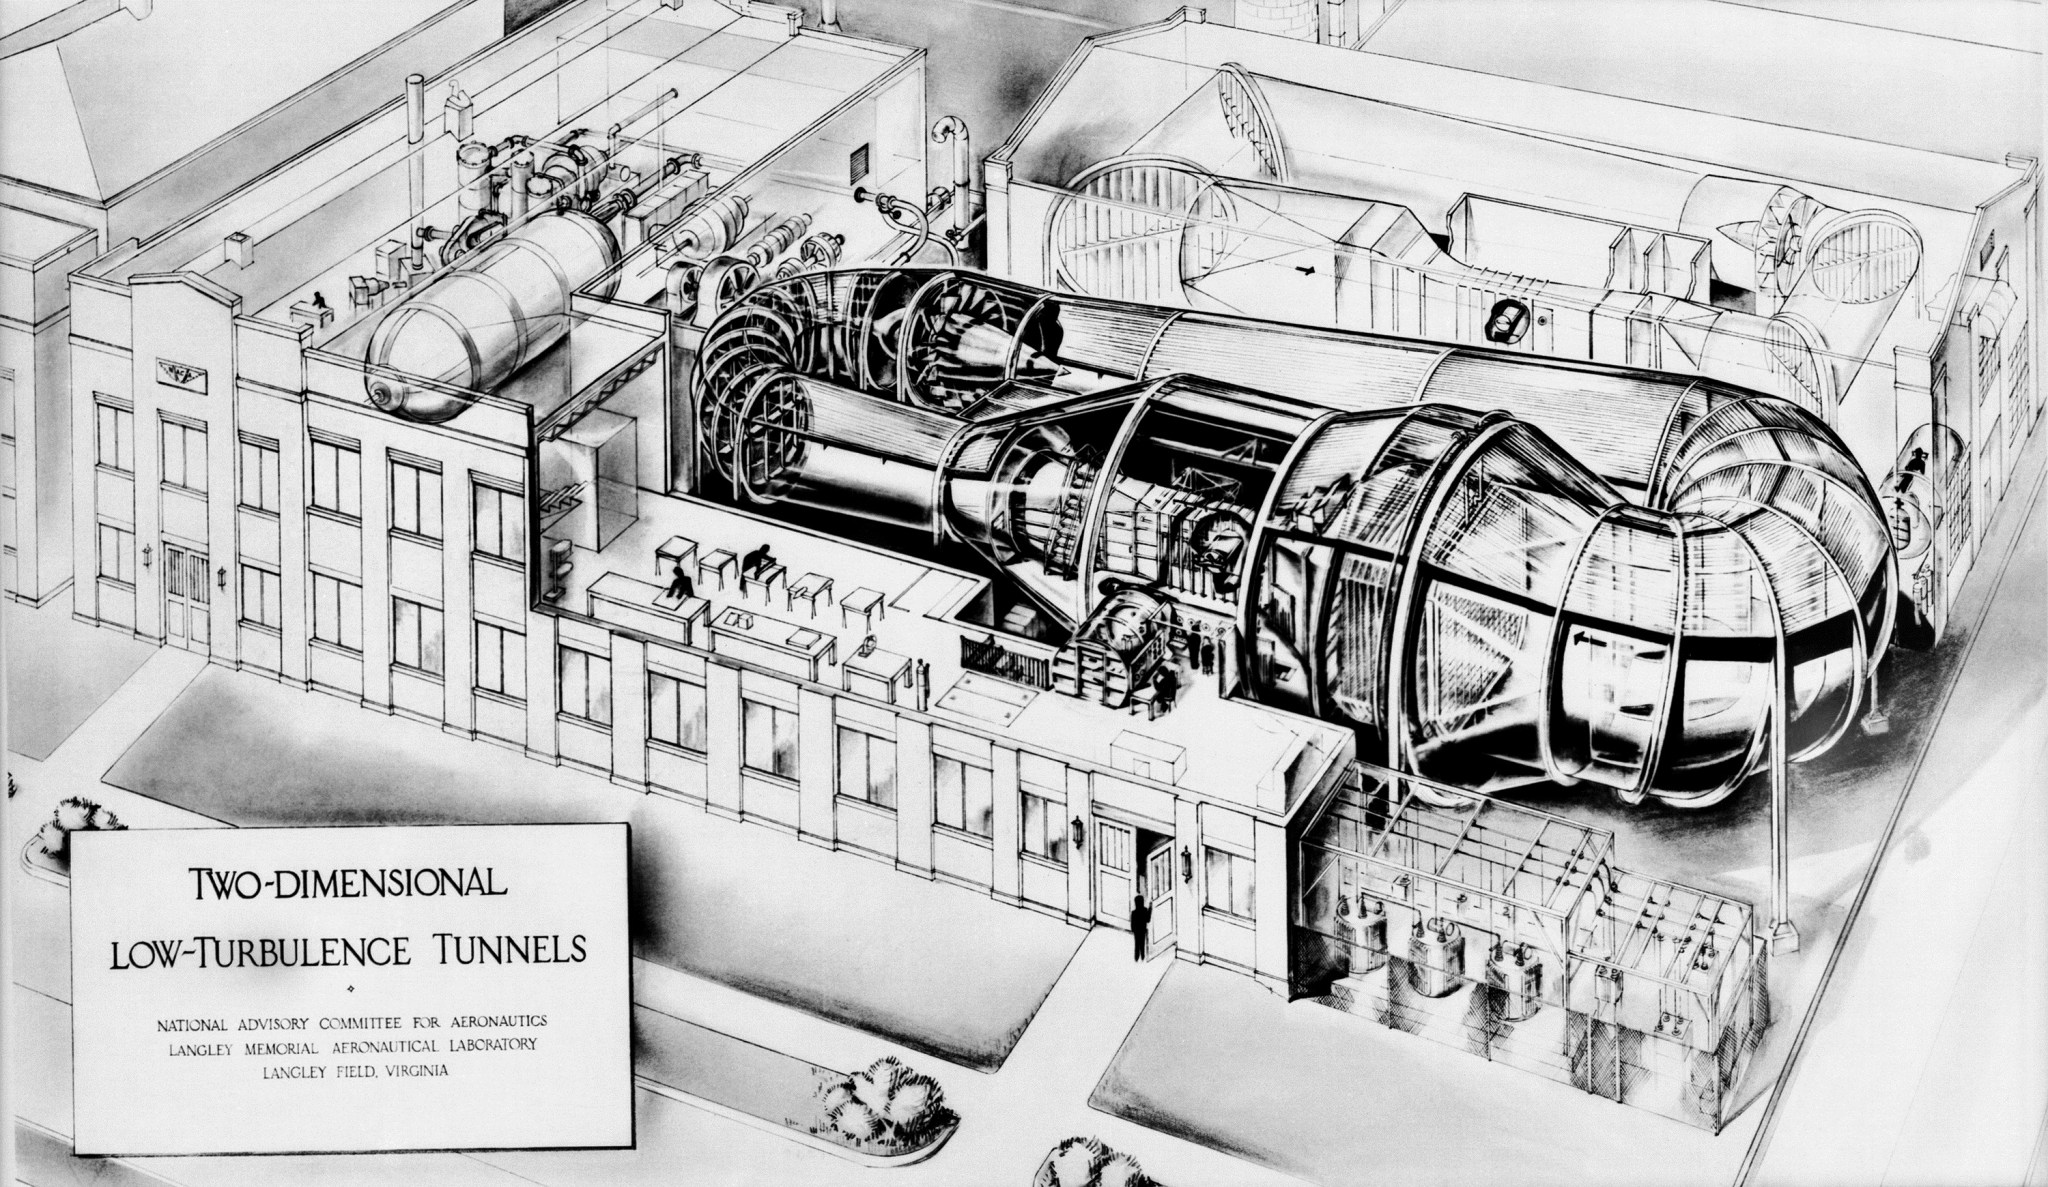 Phantom Drawing of Low Turbulence Pressure Tunnel Complex. Date unknown.